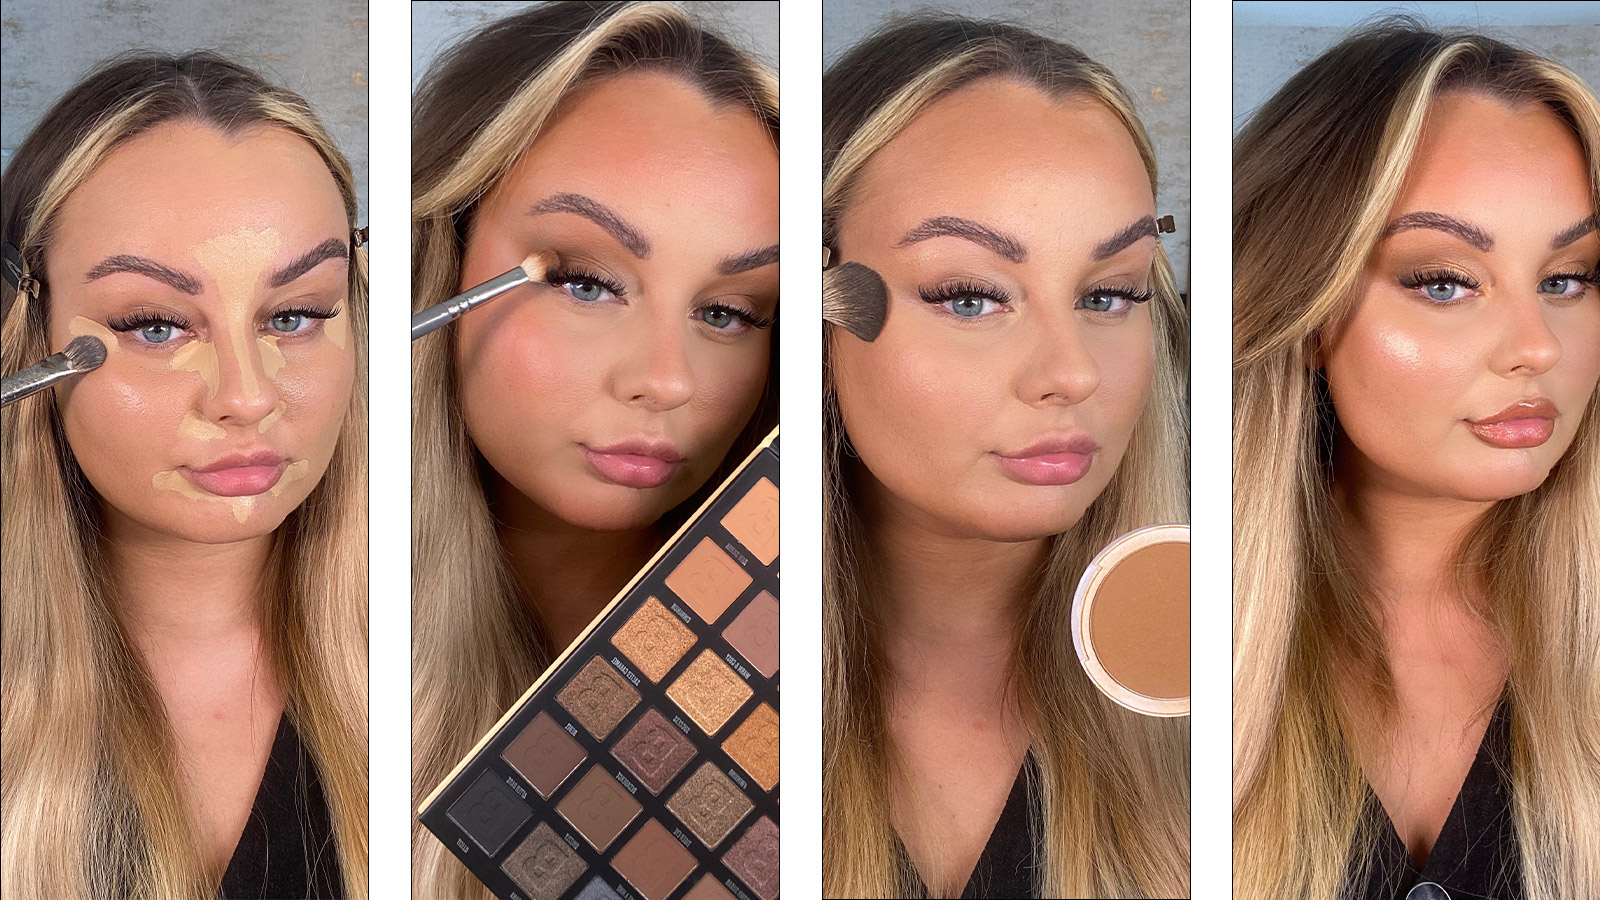 How To Basic Makeup - Beauty Bay Edited